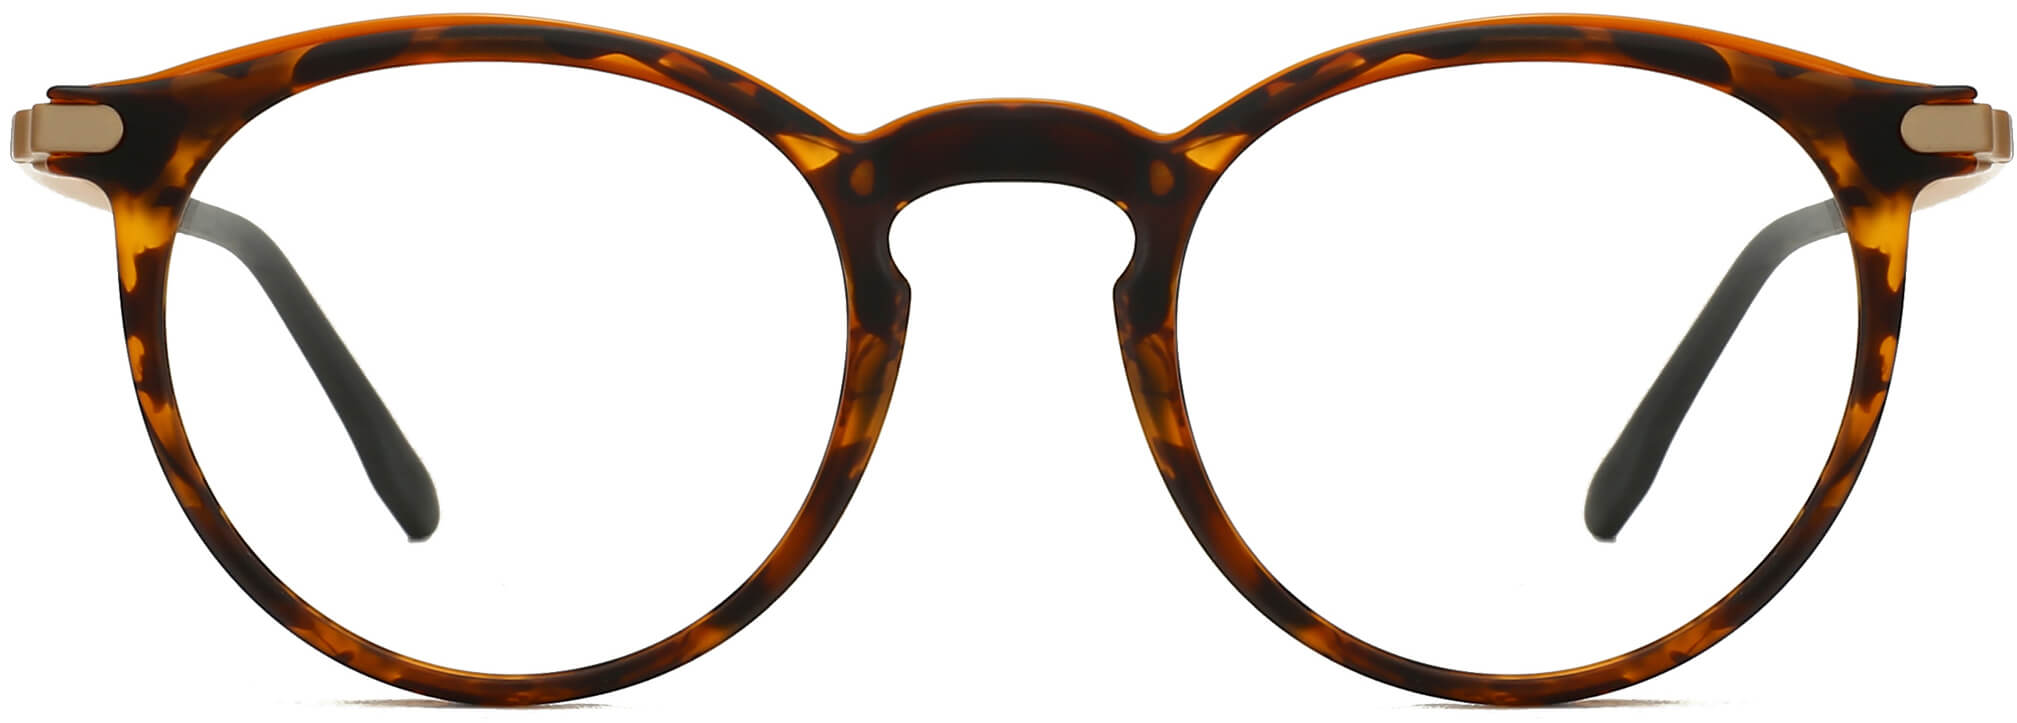 Normandy round tortoise Eyeglasses from ANRRI, front view